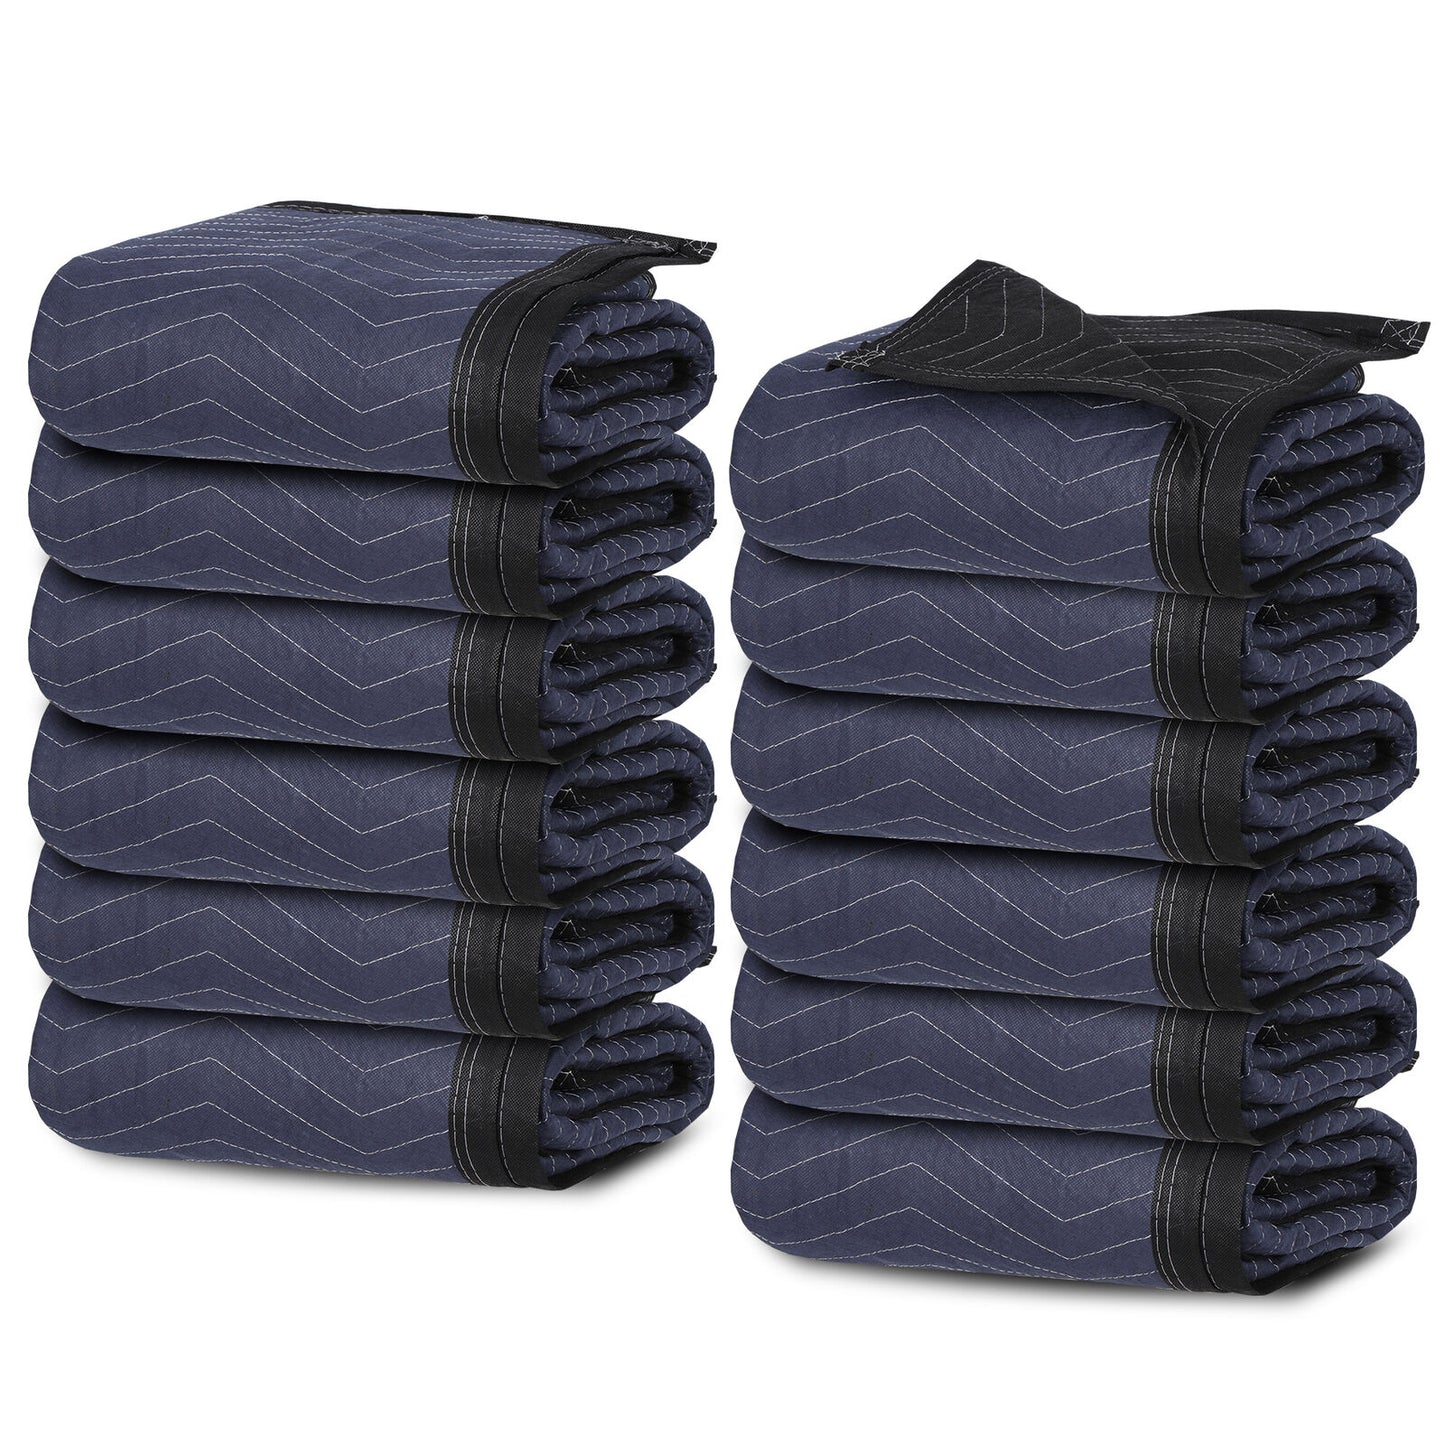 80"x72" Furniture 12 Moving Blankets Protective Shipping Packing Pads Blue/Black